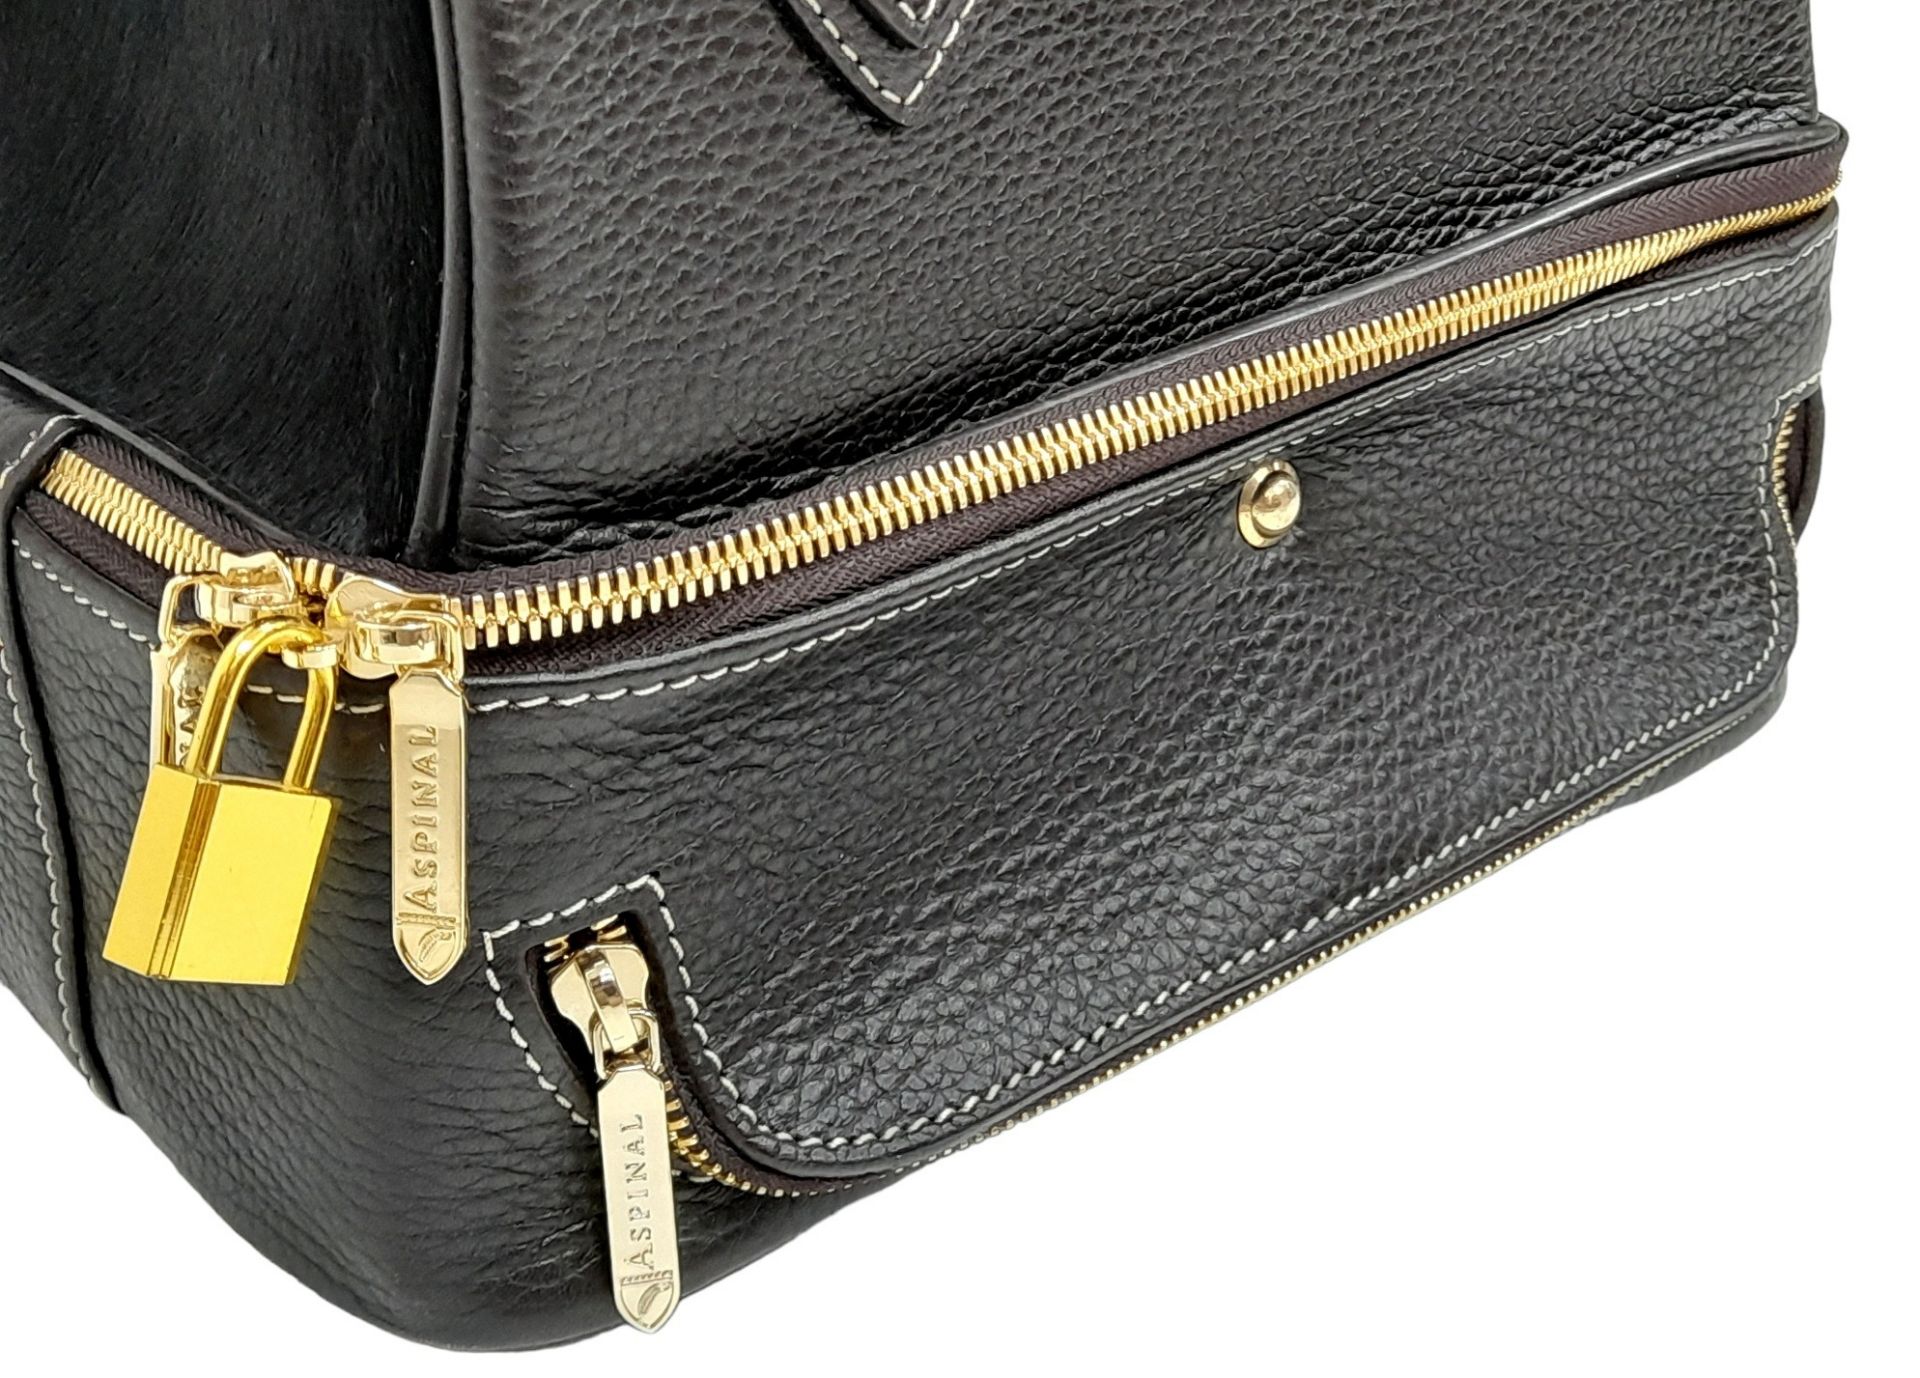 An Aspinal Brown Portofino Convertible Luggage Bag. Leather and pony fur exterior with gold-toned - Image 3 of 16